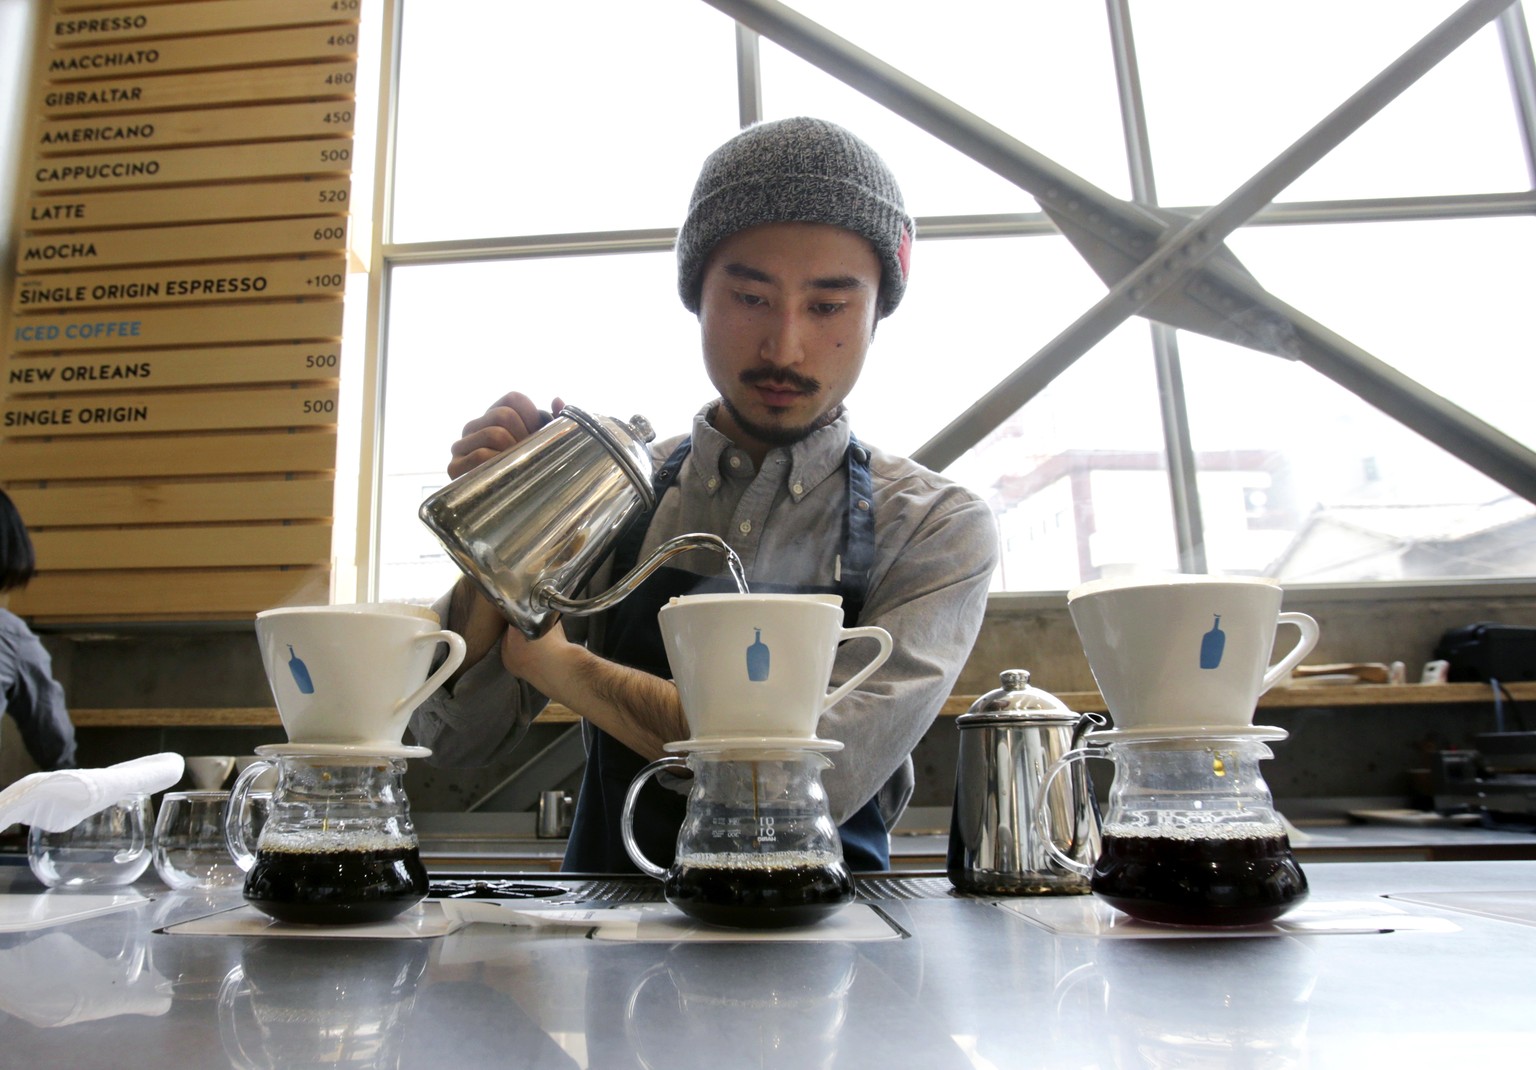 In this April 27, 2015 photo, a barista brews coffee at a Blue Bottle Coffee shop in Tokyo. Japan, famous for green tea, is welcoming artisanal American coffee roaster Blue Bottle with long lines that ...